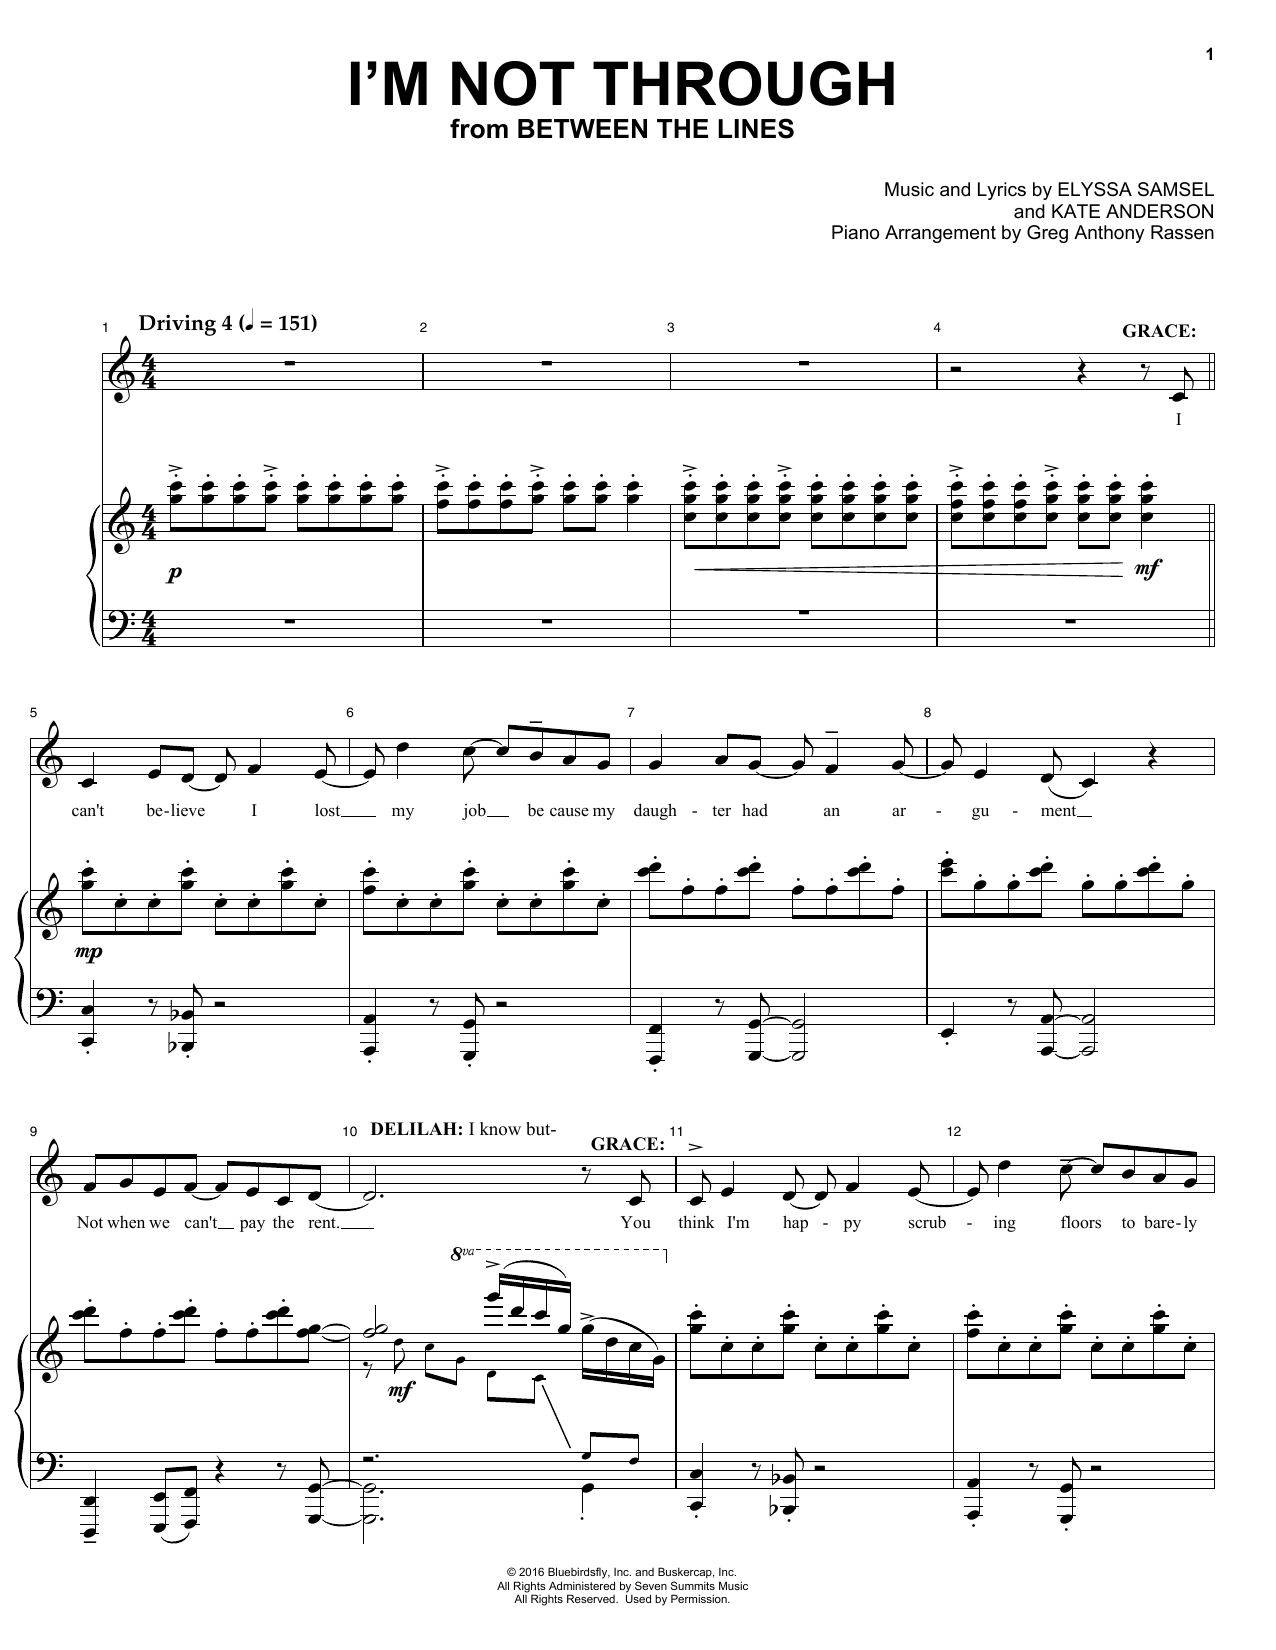 Download Elyssa Samsel & Kate Anderson I'm Not Through (from Between The Lines Sheet Music